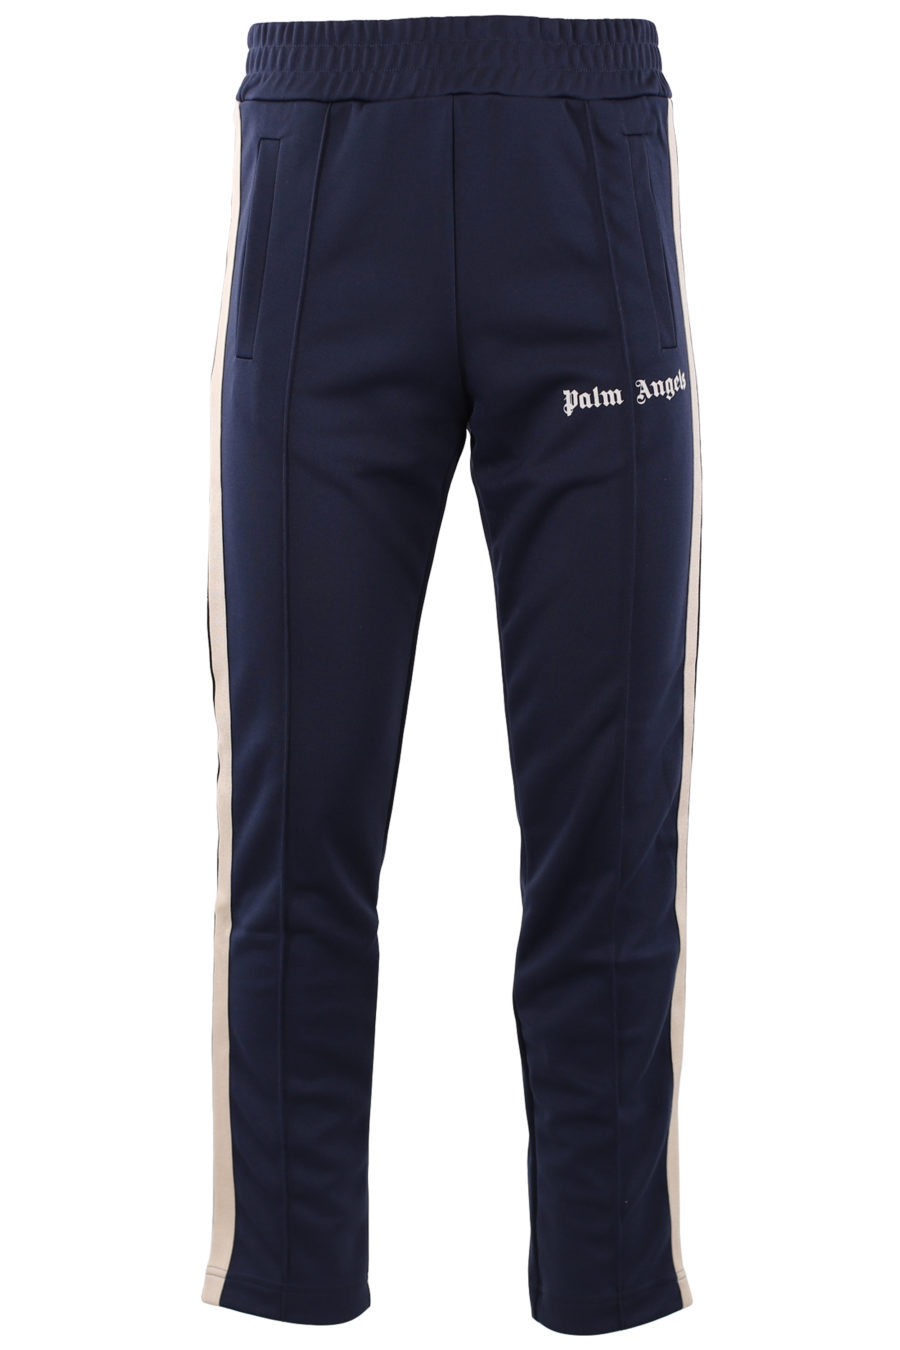 Blue trousers with logo and side stripes - IMG1 9286